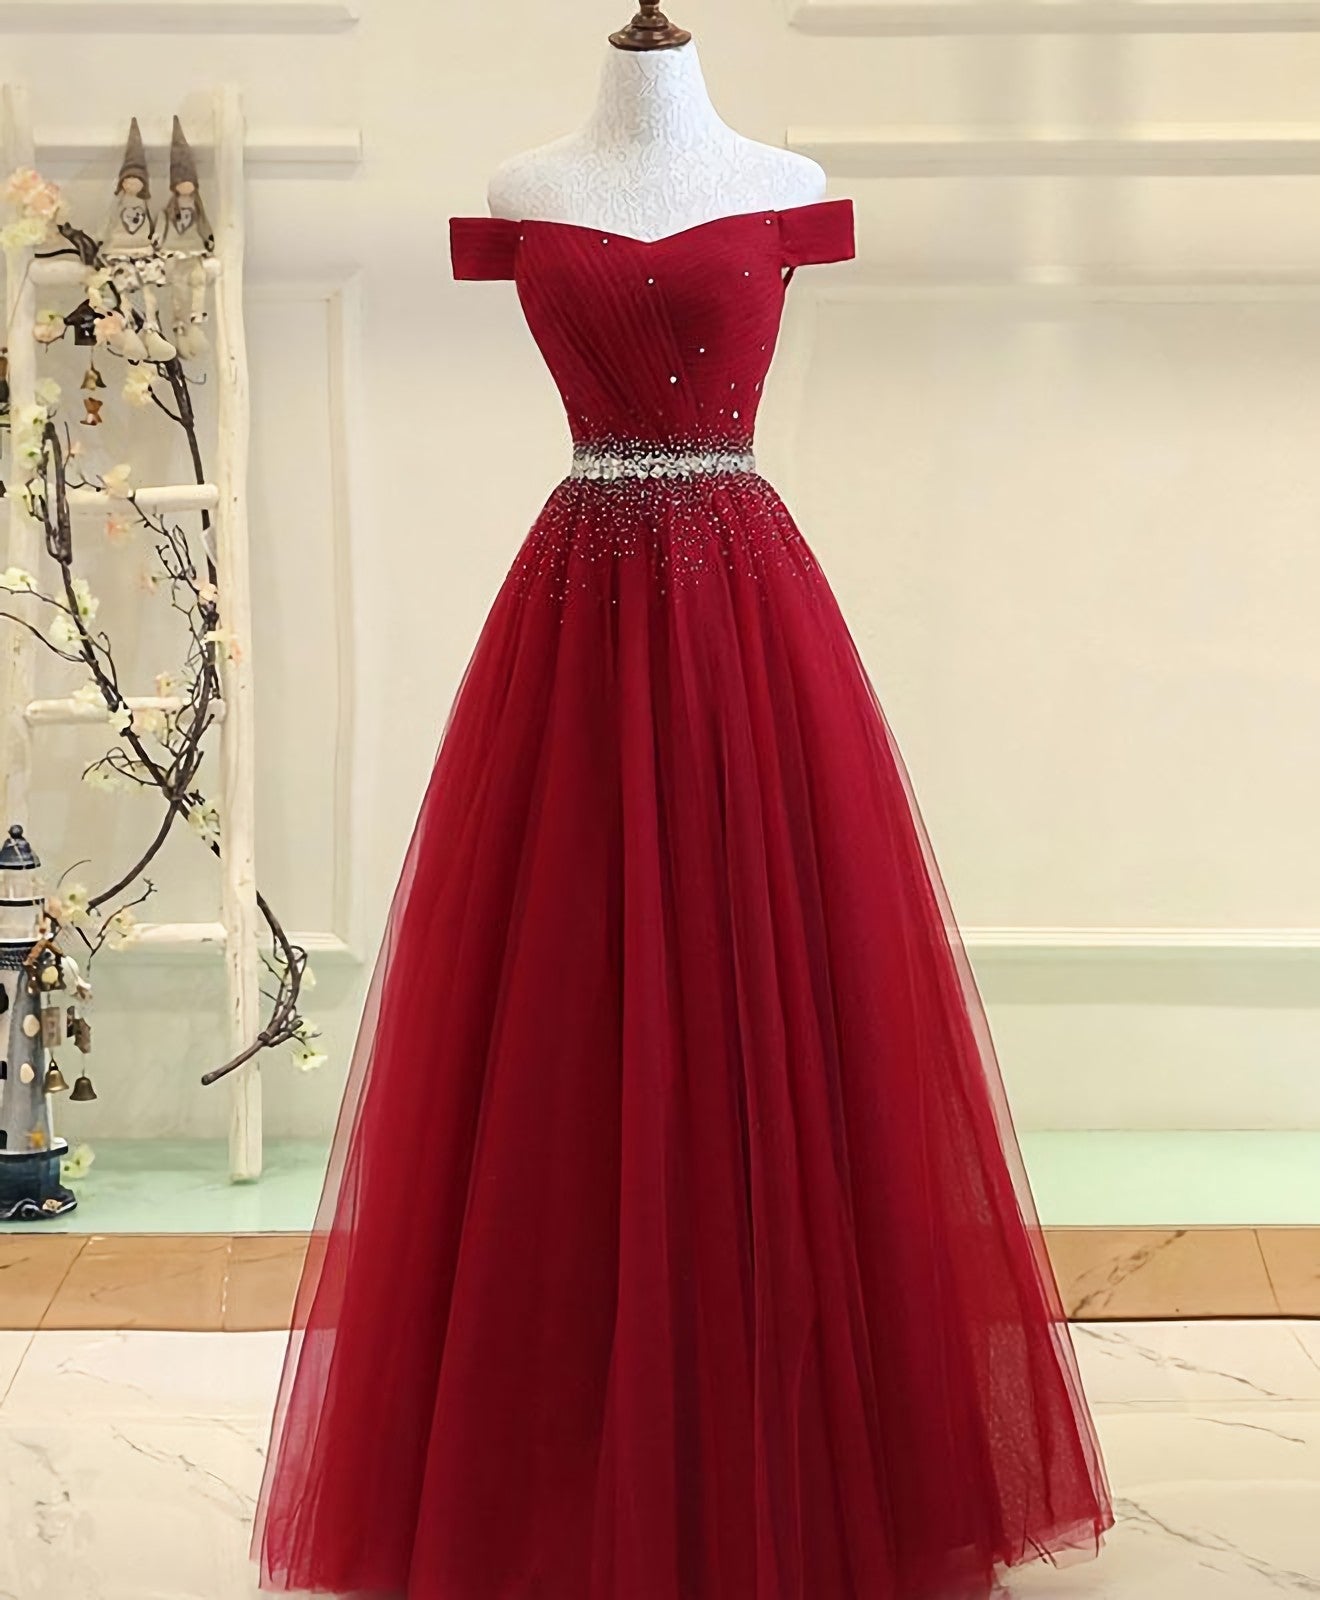 Prom Dress Backless, Burgundy Tulle Off Shoulder Long Prom Dress, Burgundy Evening Dress